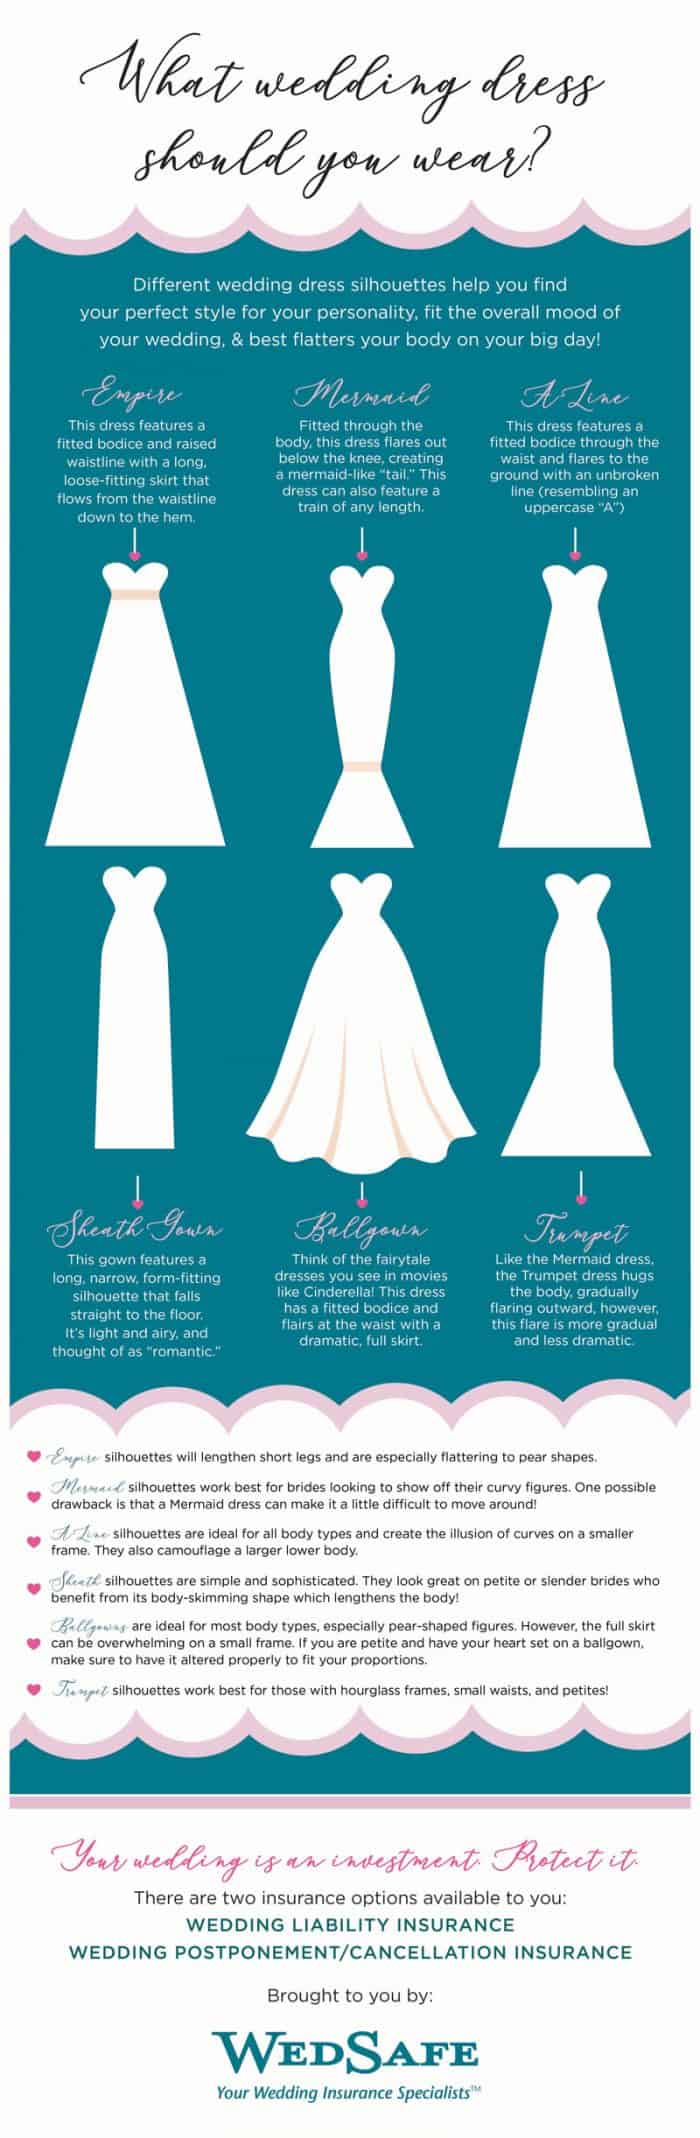 Infographic showing 6 wedding dress styles.